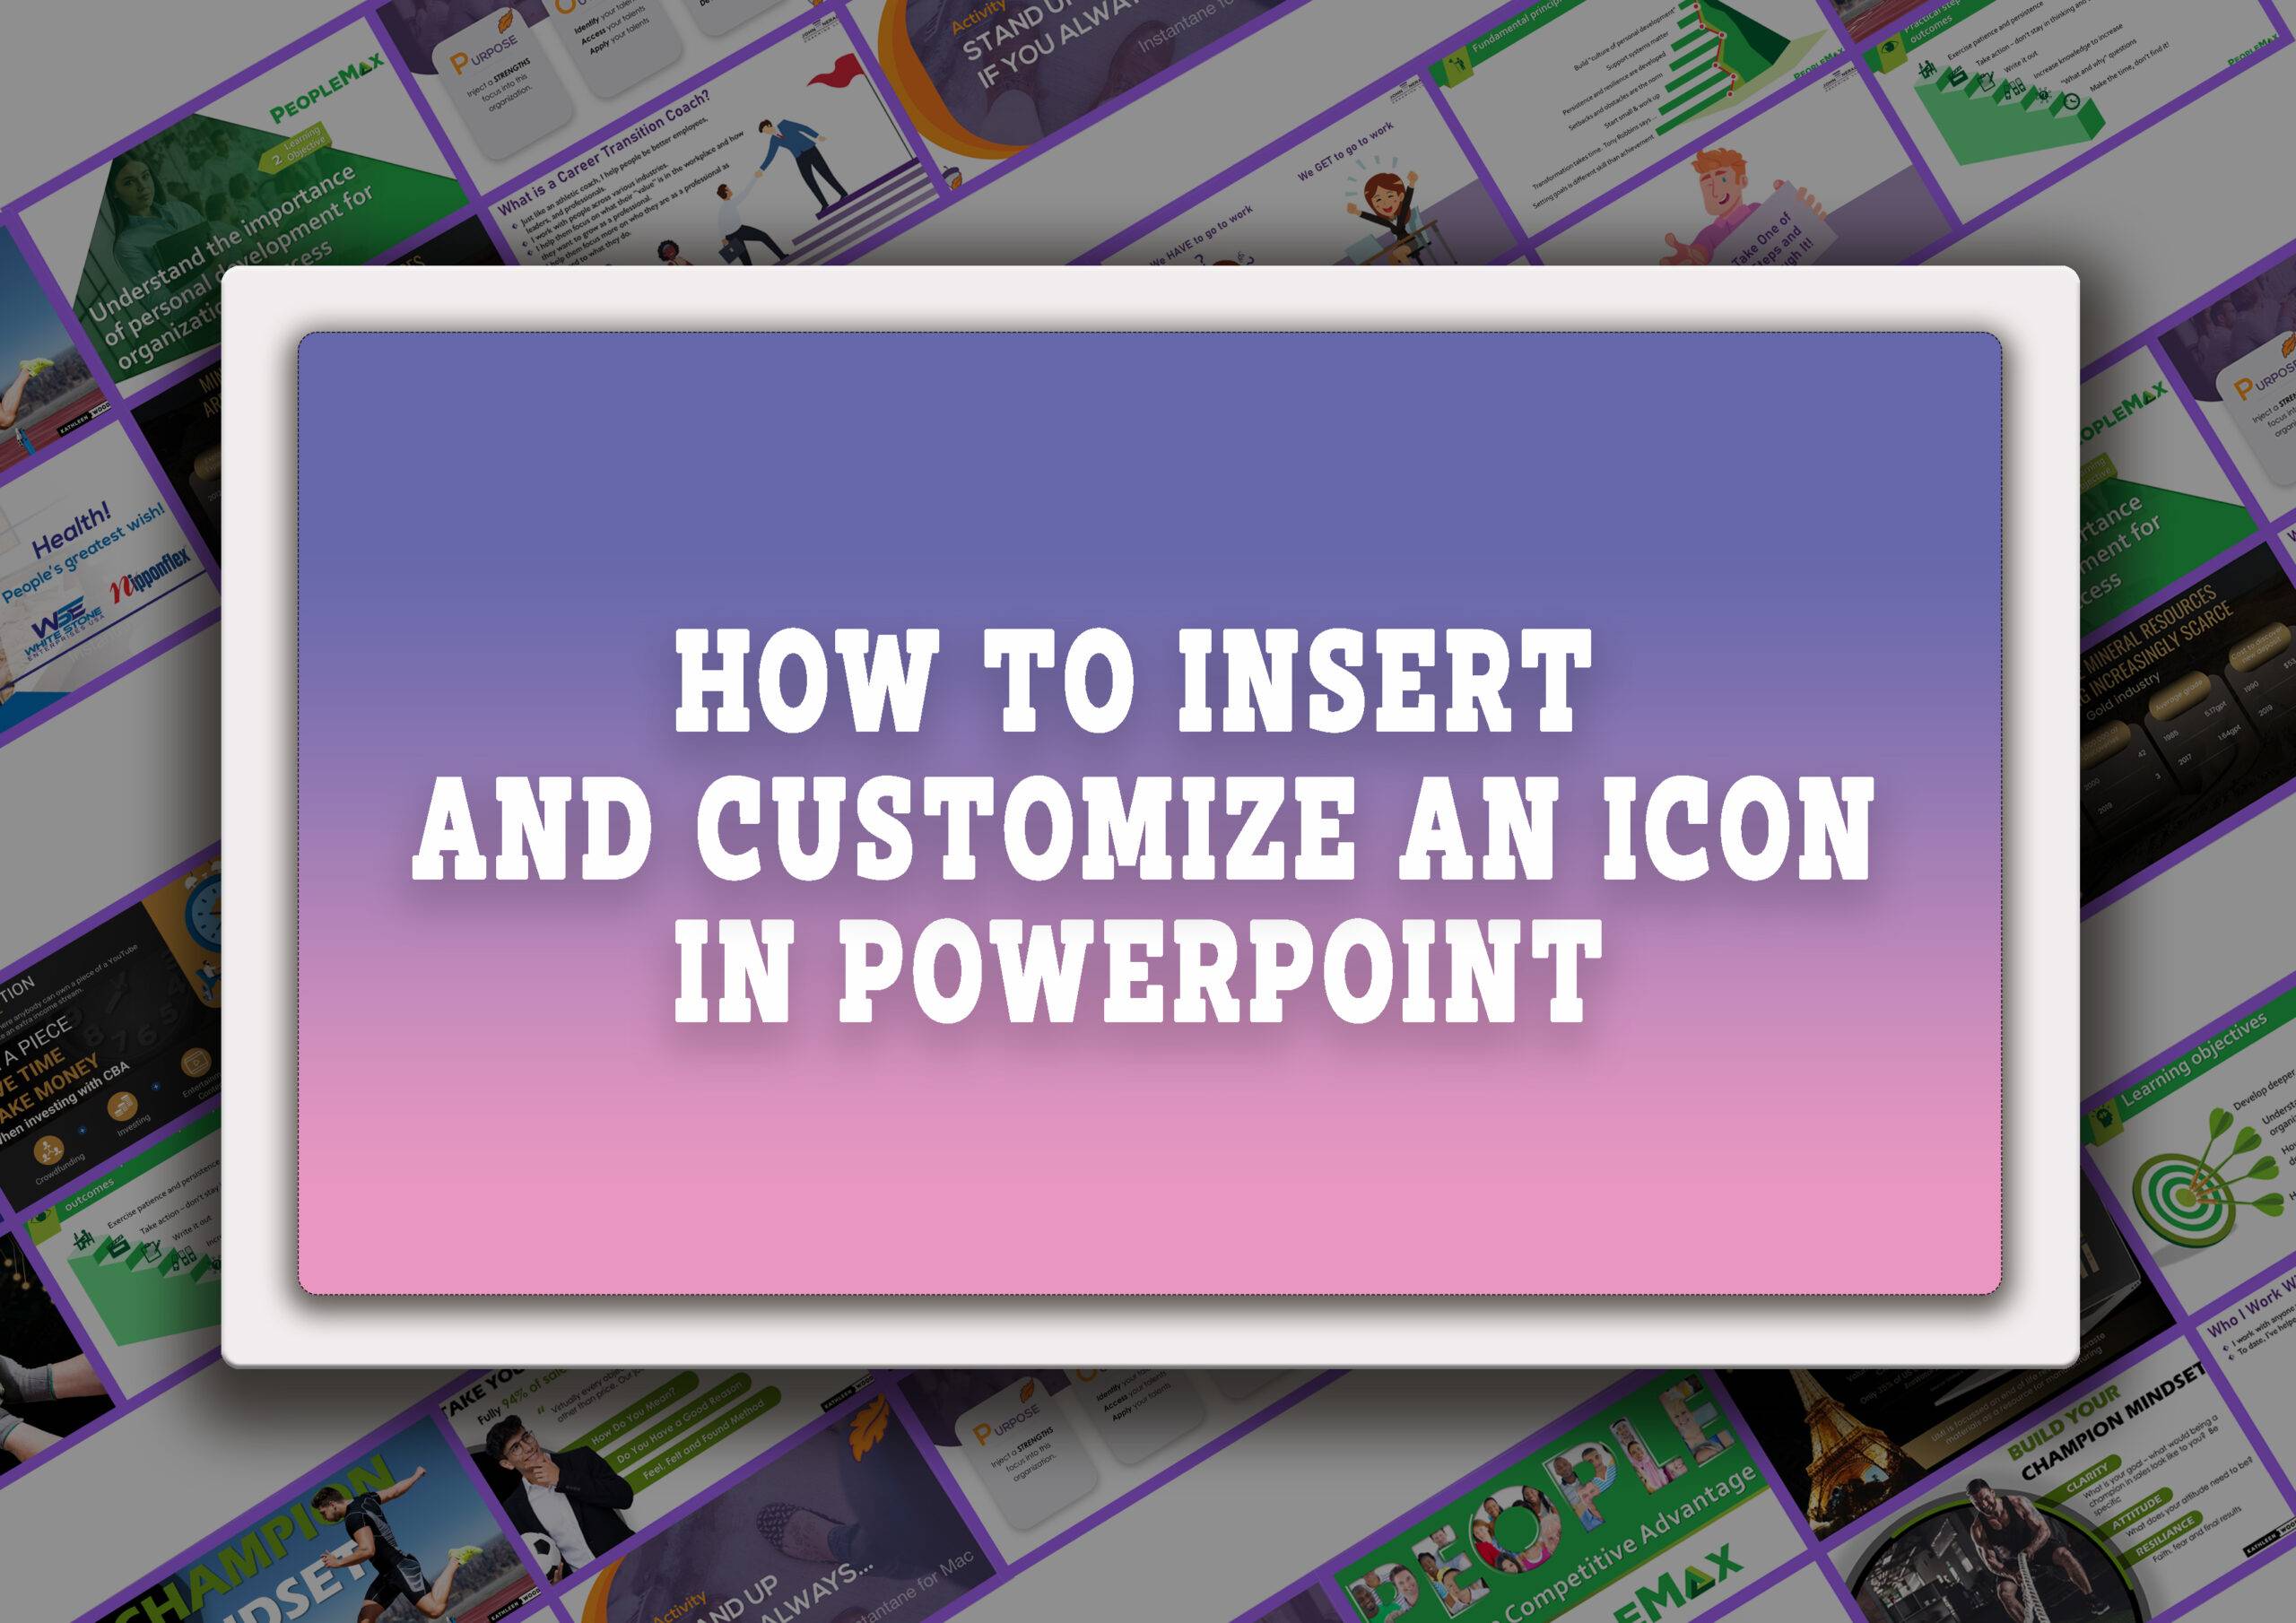 Inserting and customize an icon in PowerPoint